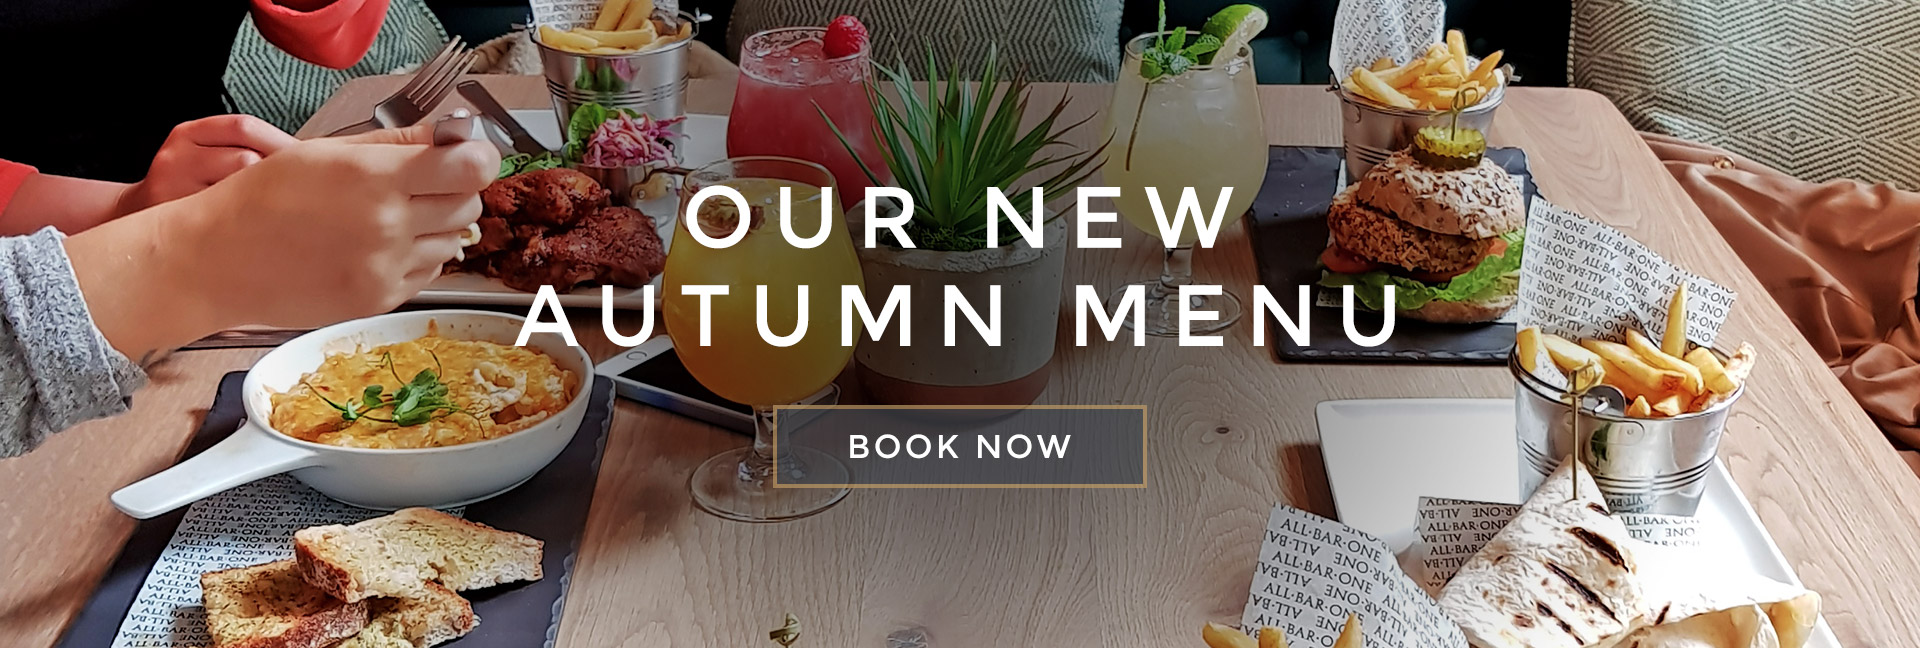 Our new Autumn menu at All Bar One Trafford Centre - Book now